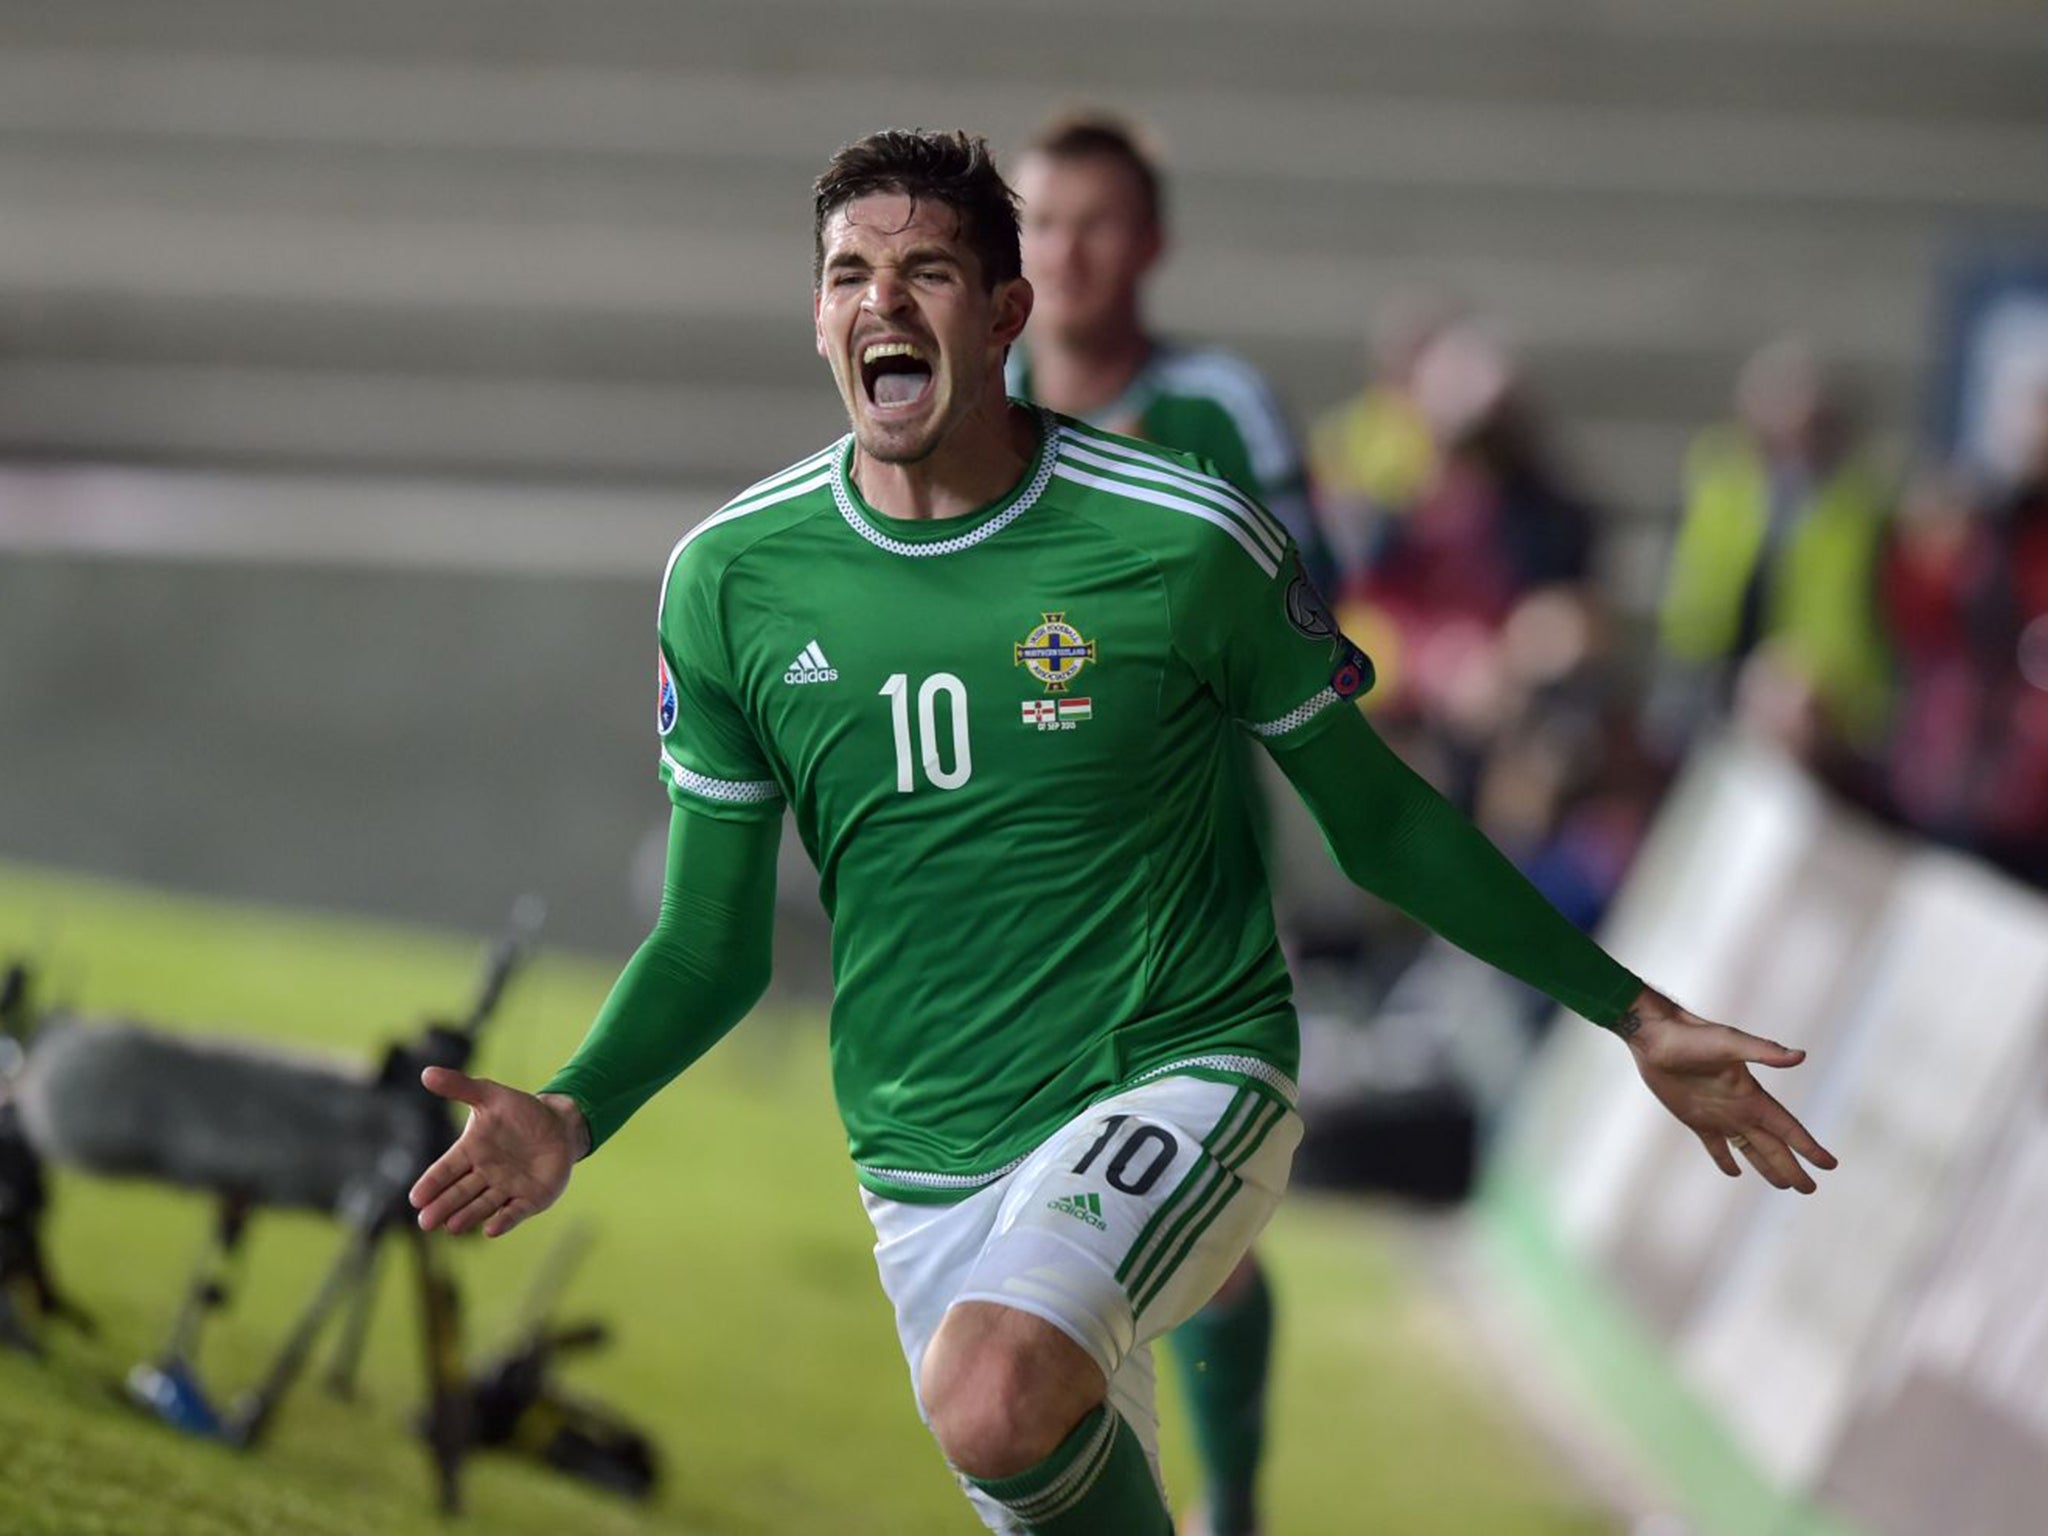 Kyle Lafferty celebrates scoring 10-man Northern Ireland’s equaliser deep in injury time as they salvaged a vital 1-1 draw against Hungary at Windsor Park